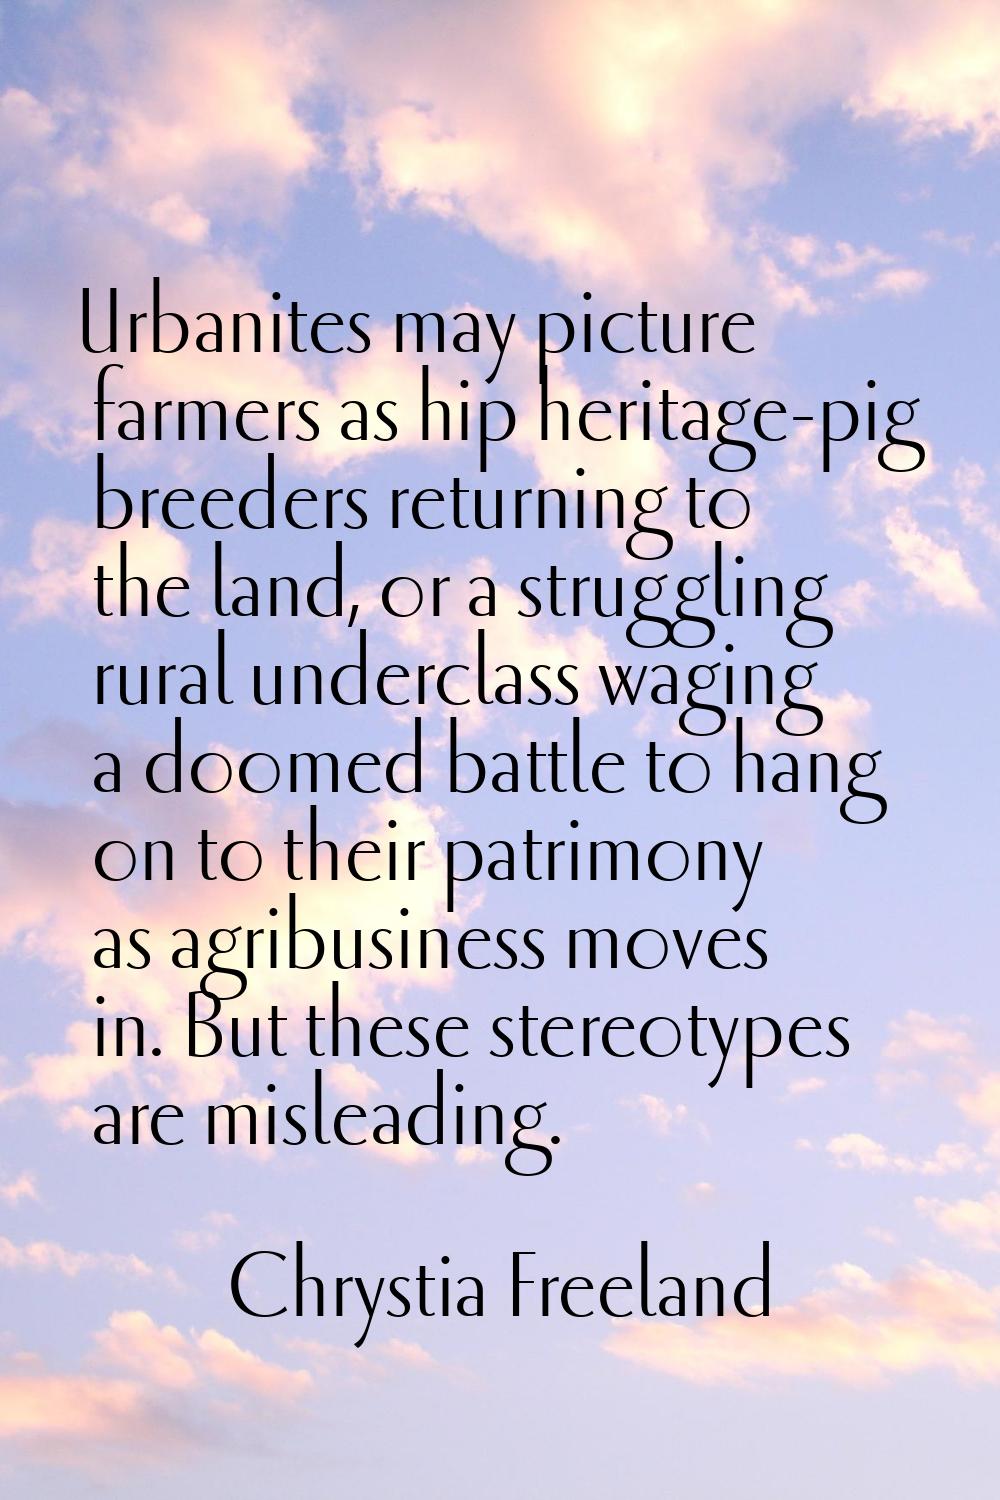 Urbanites may picture farmers as hip heritage-pig breeders returning to the land, or a struggling r